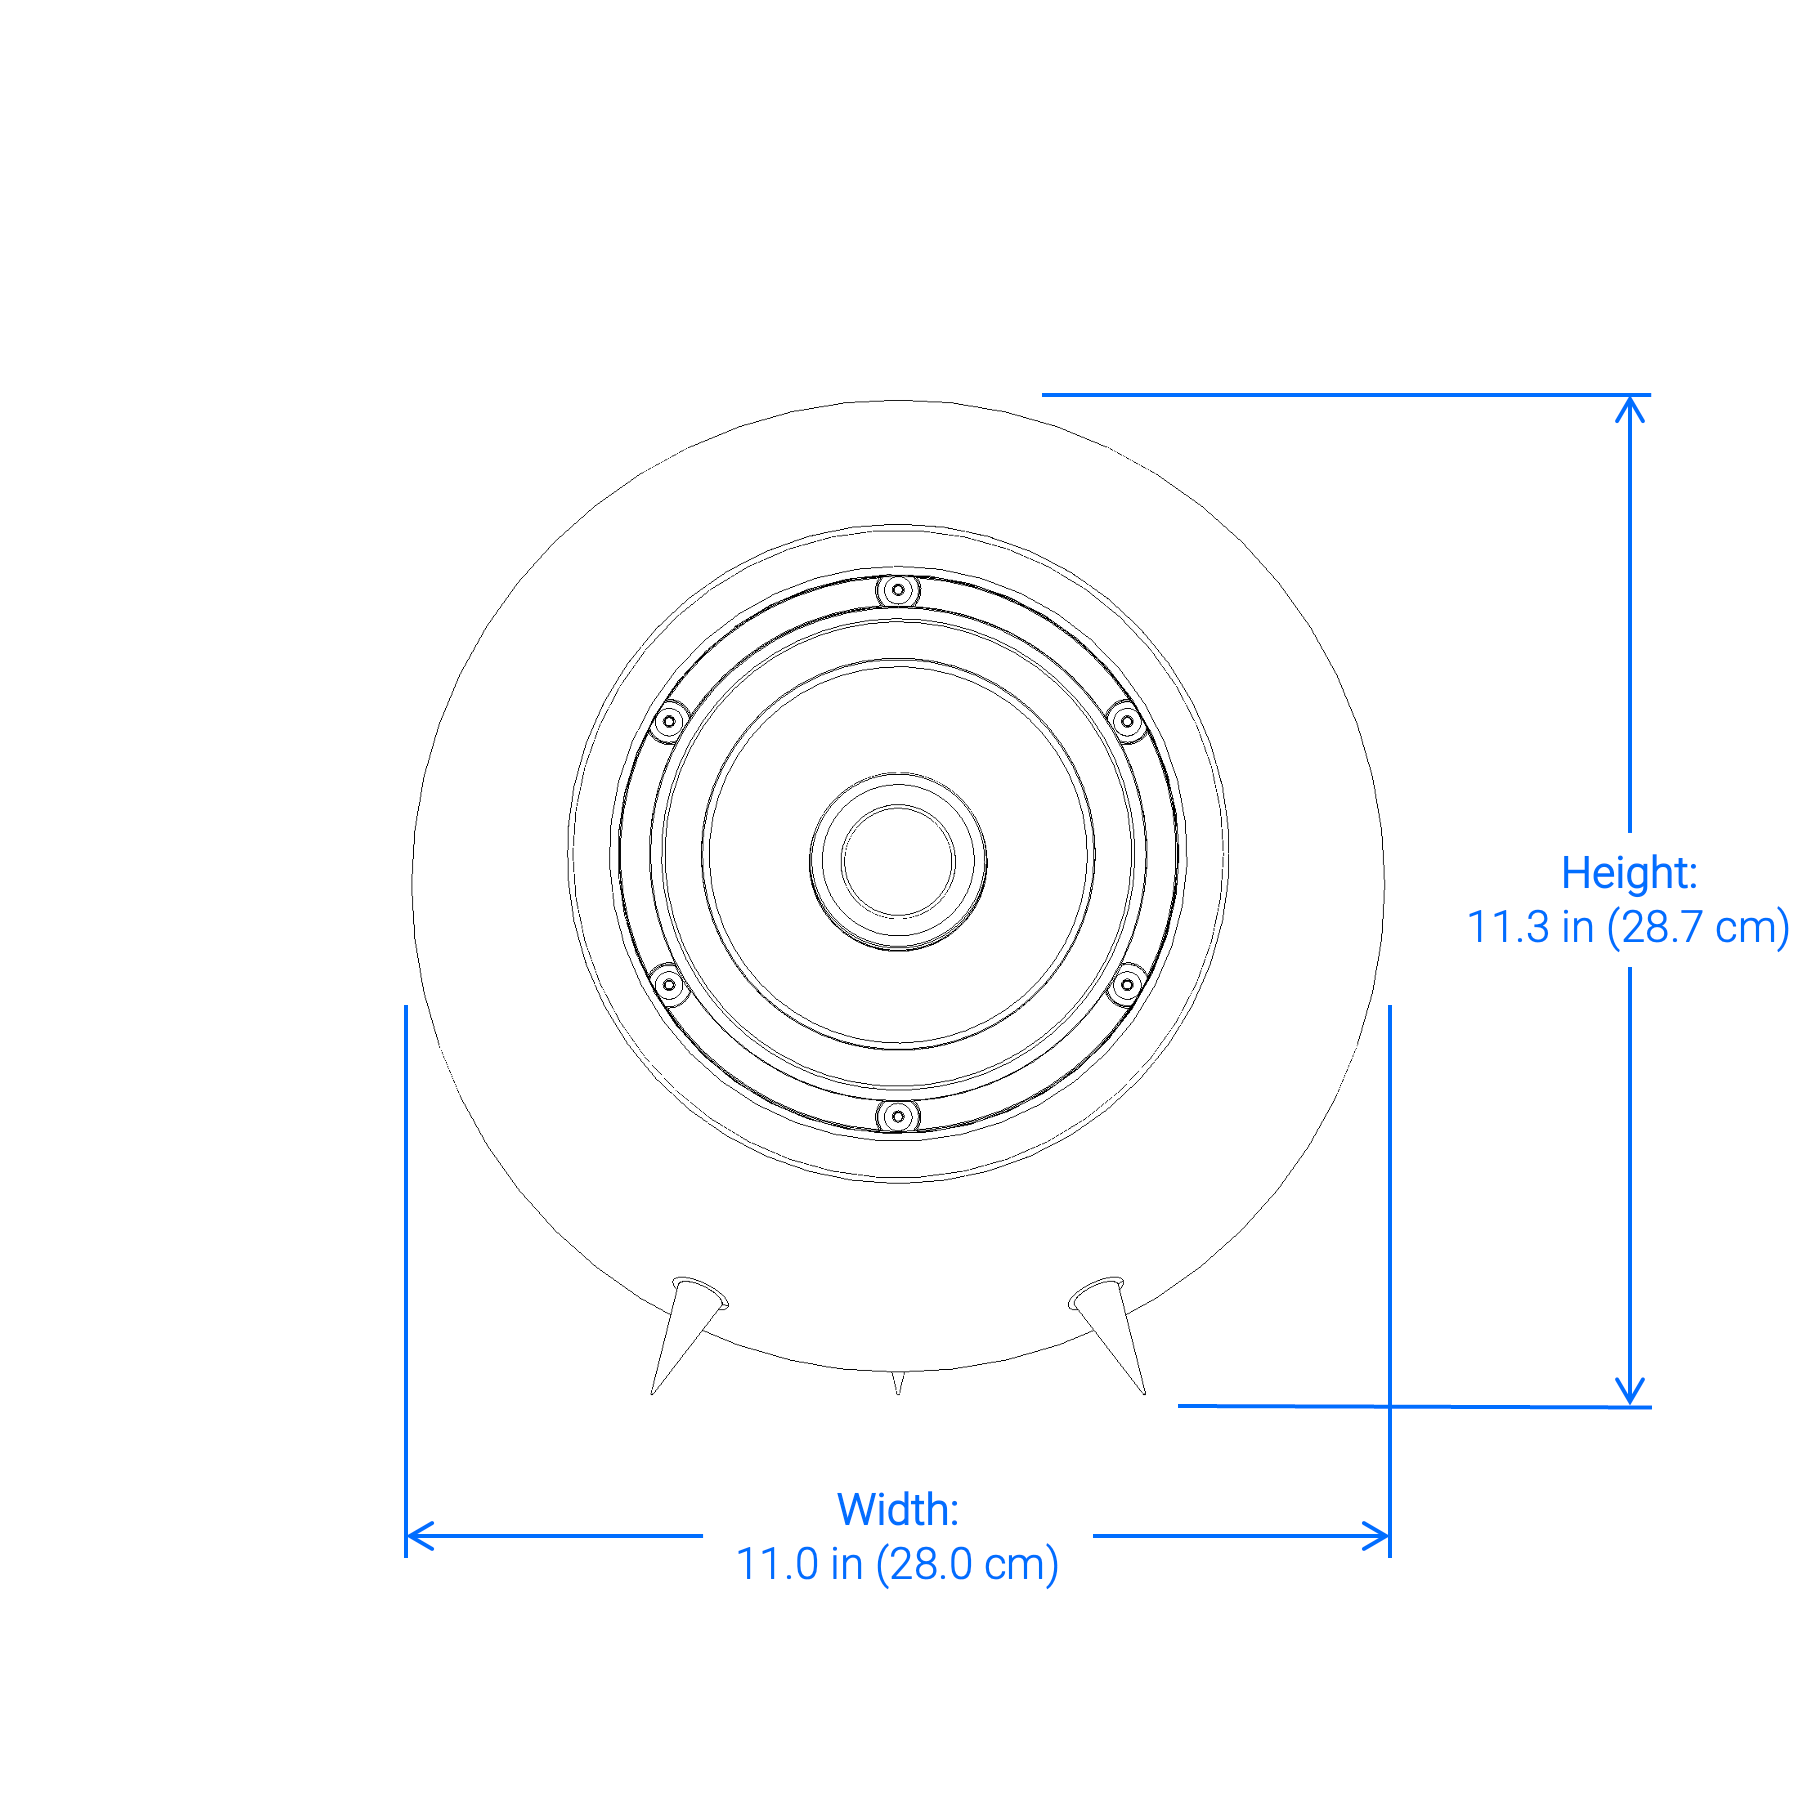 Technical specifications front view of width and height of Iris Audio speakers. Height 11.3 inches, 28.7 cm. Width 11.0 inches, 28.0 cm.